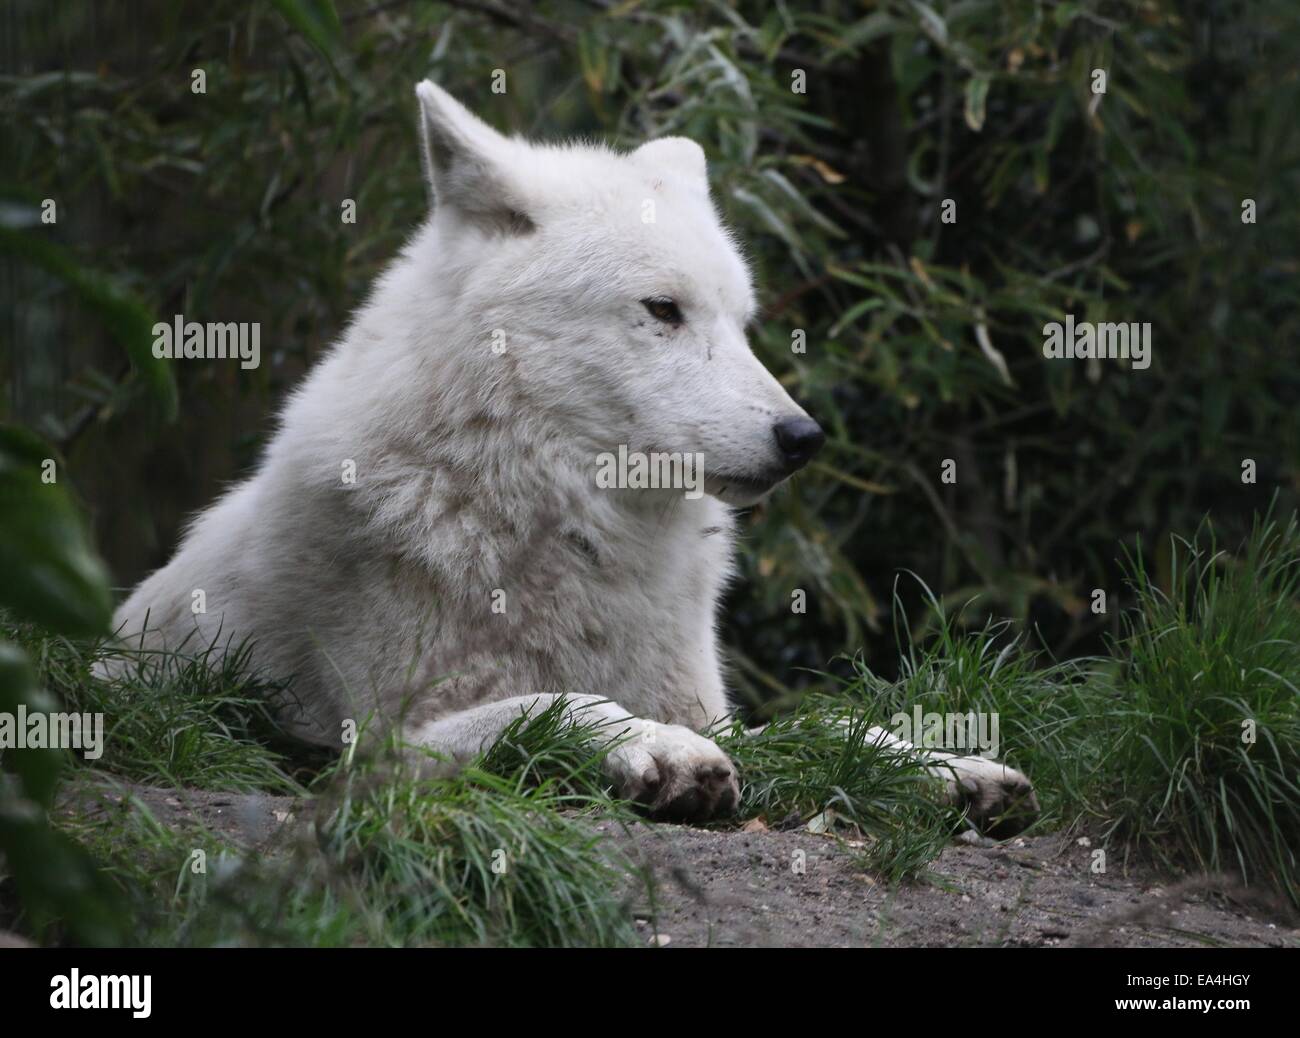 Close-up of the All-white Hudson Bay wolf (Canis lupus hudsonicus) resting in a natural setting Stock Photo